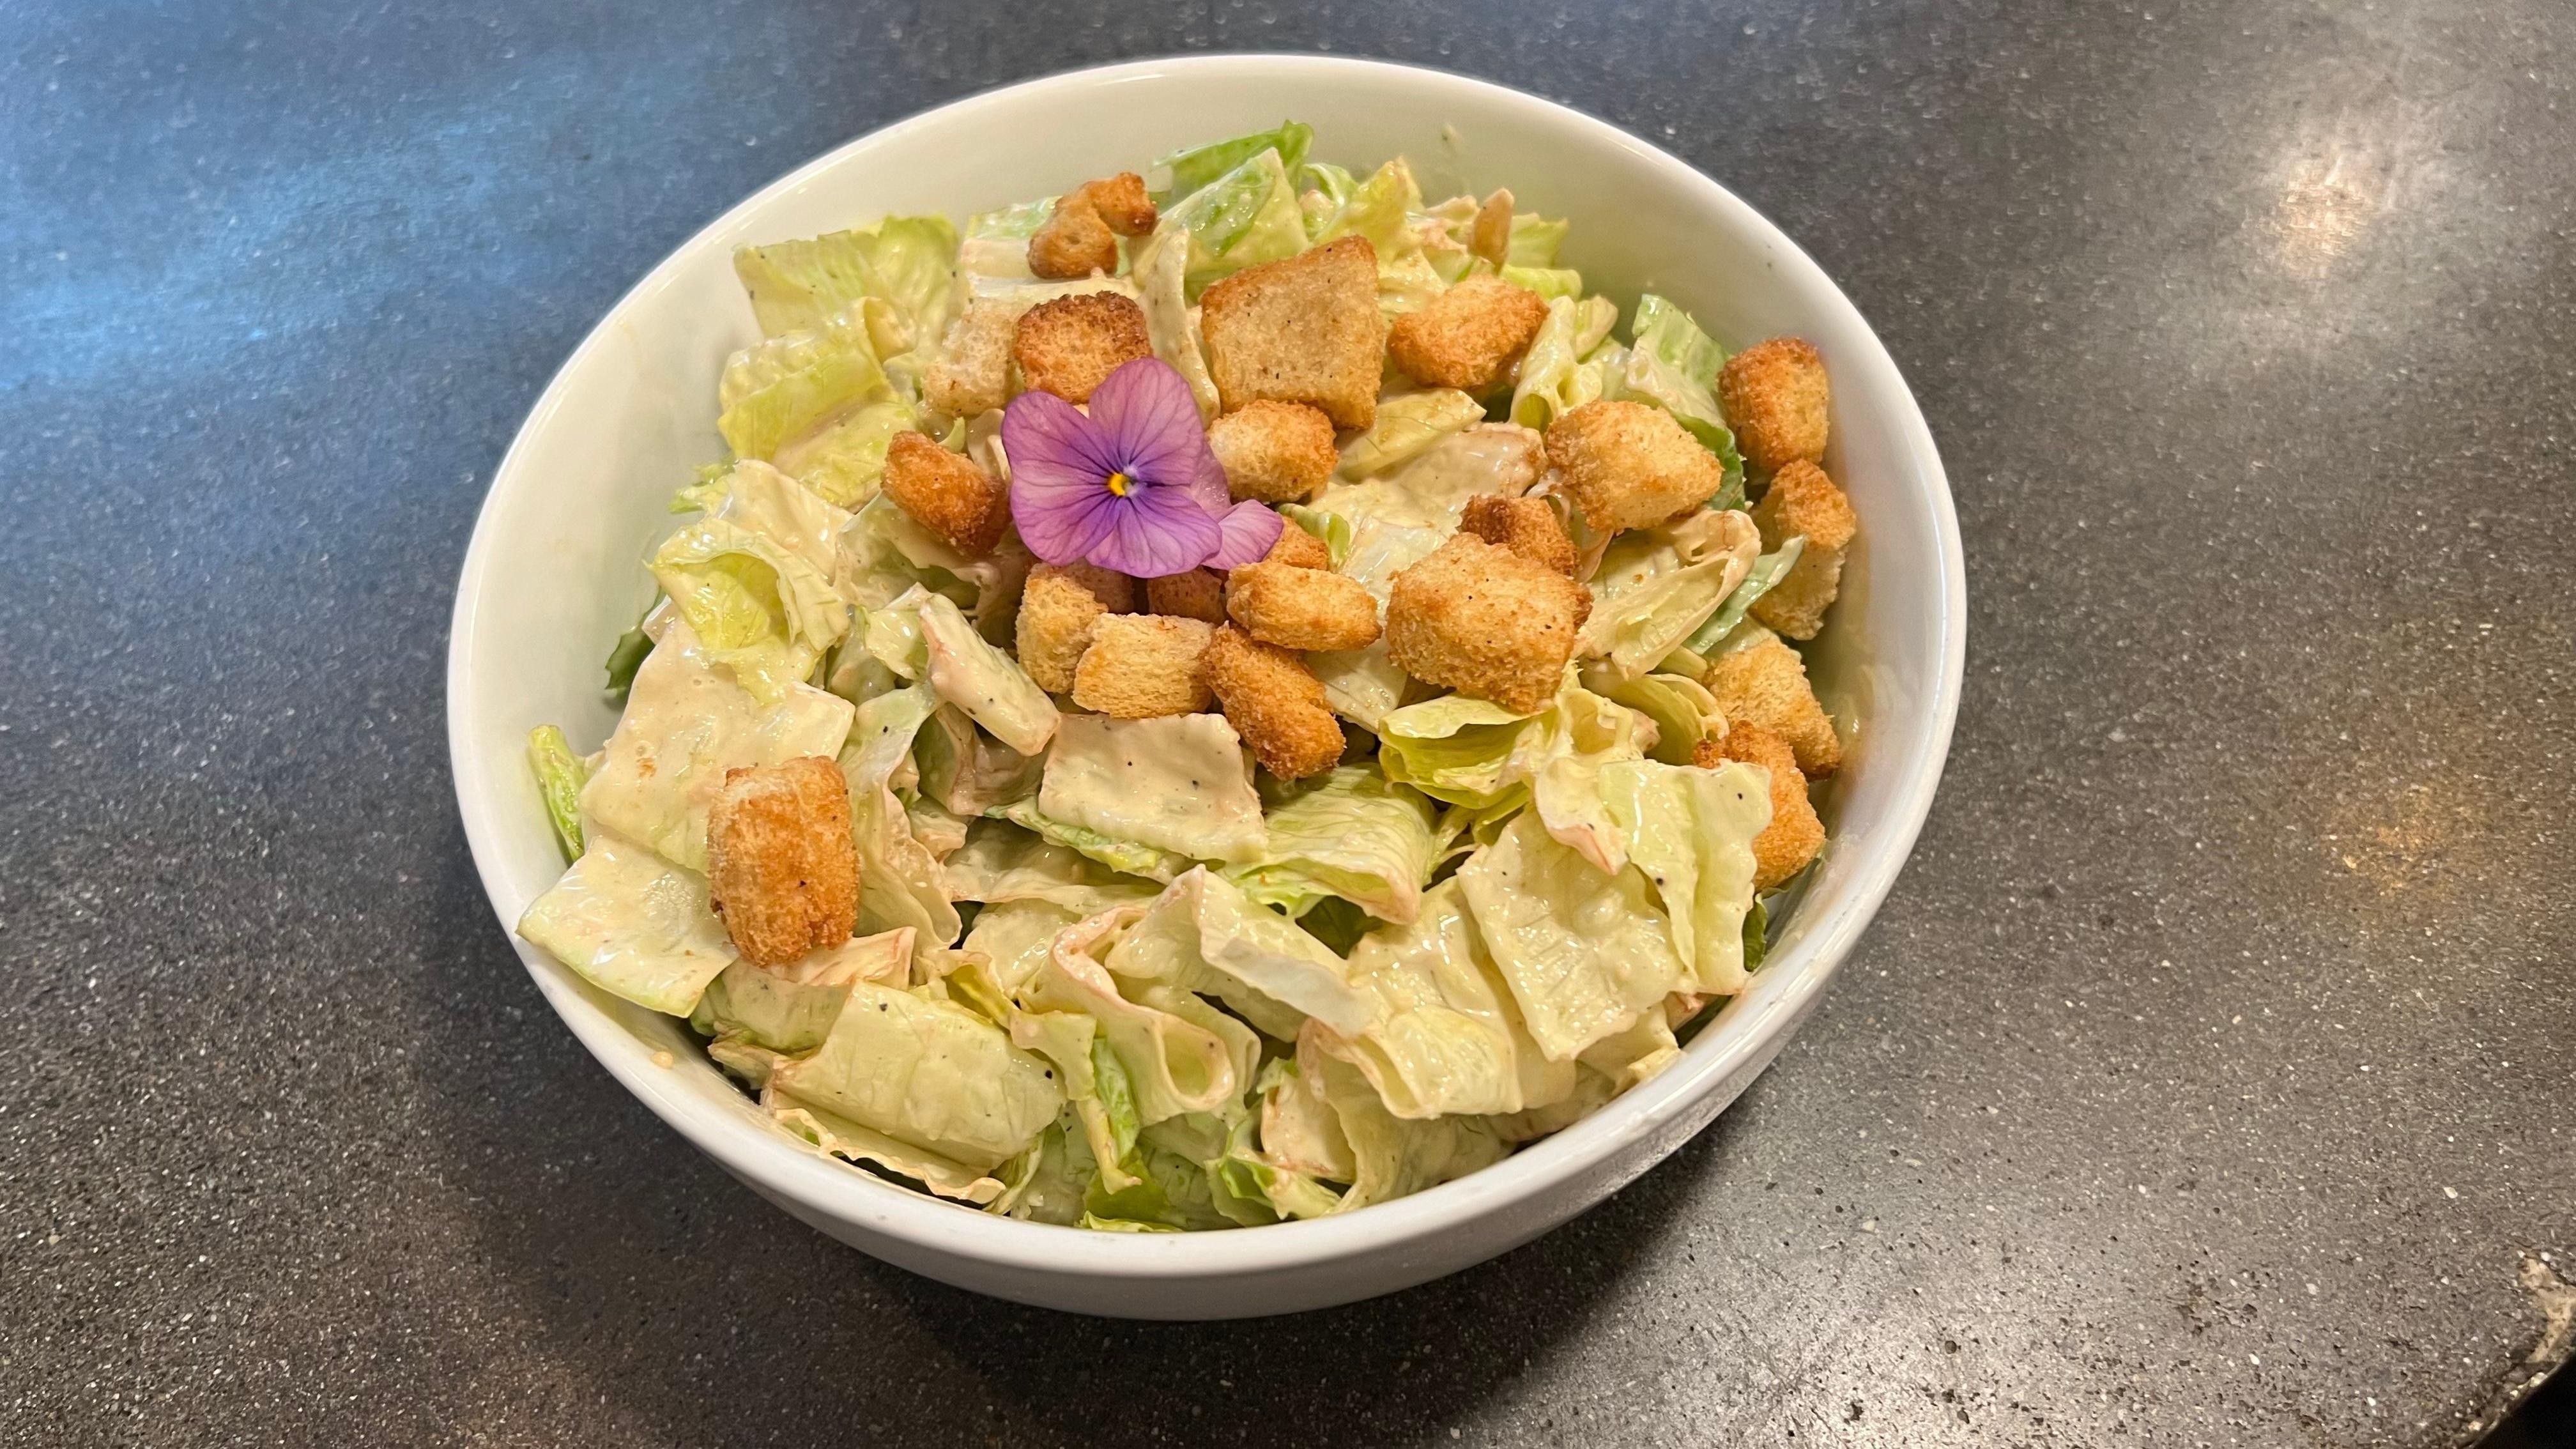 Sultry Caesar's Salad